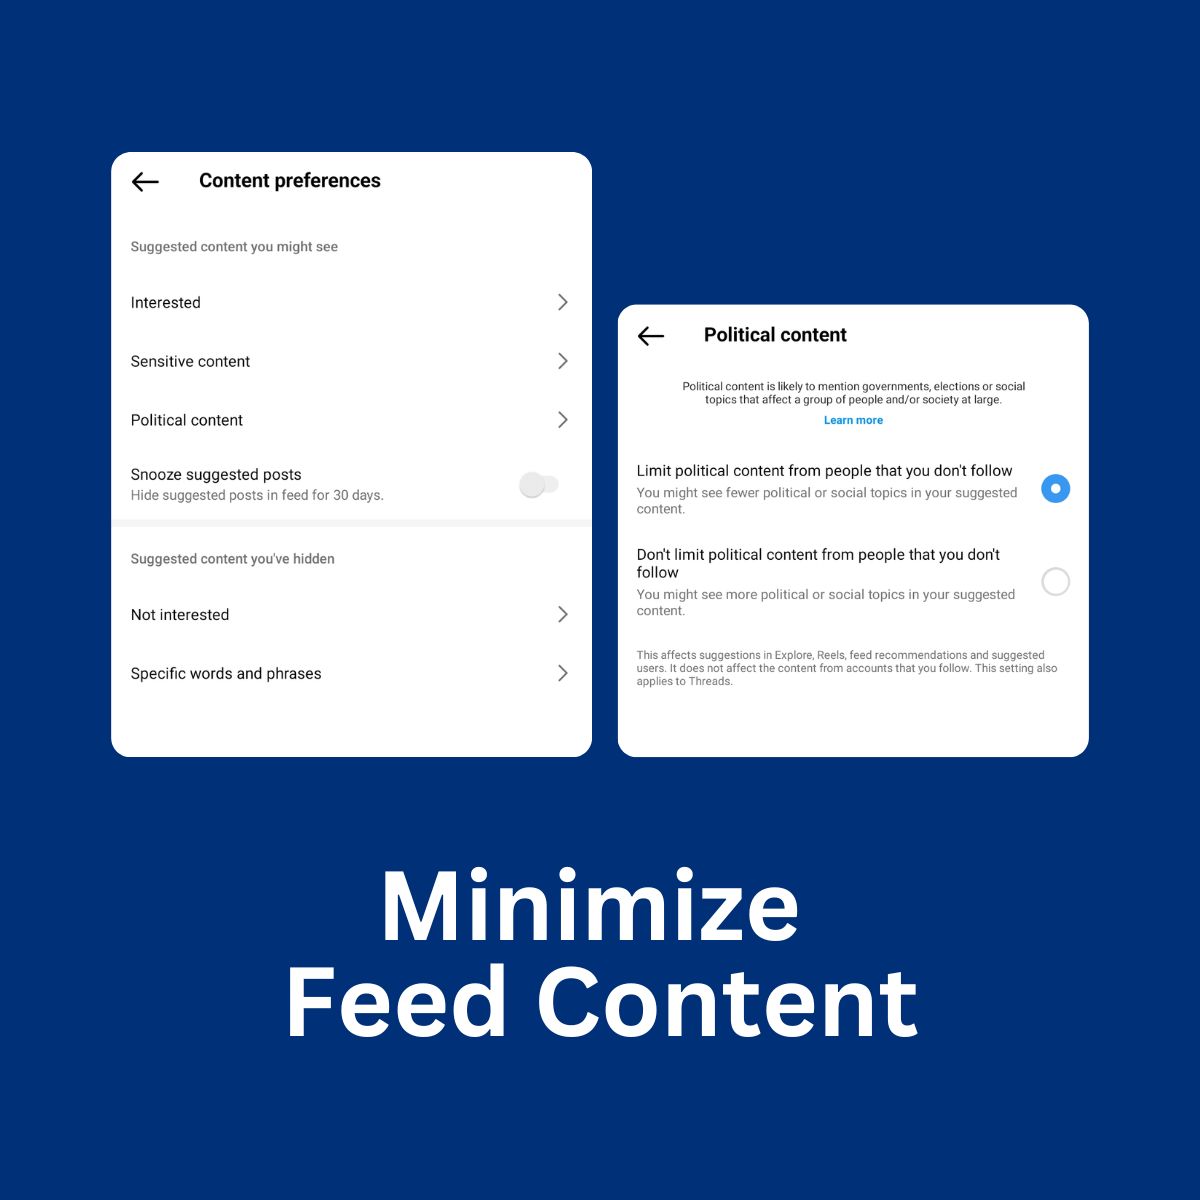 Minimize Feed Content